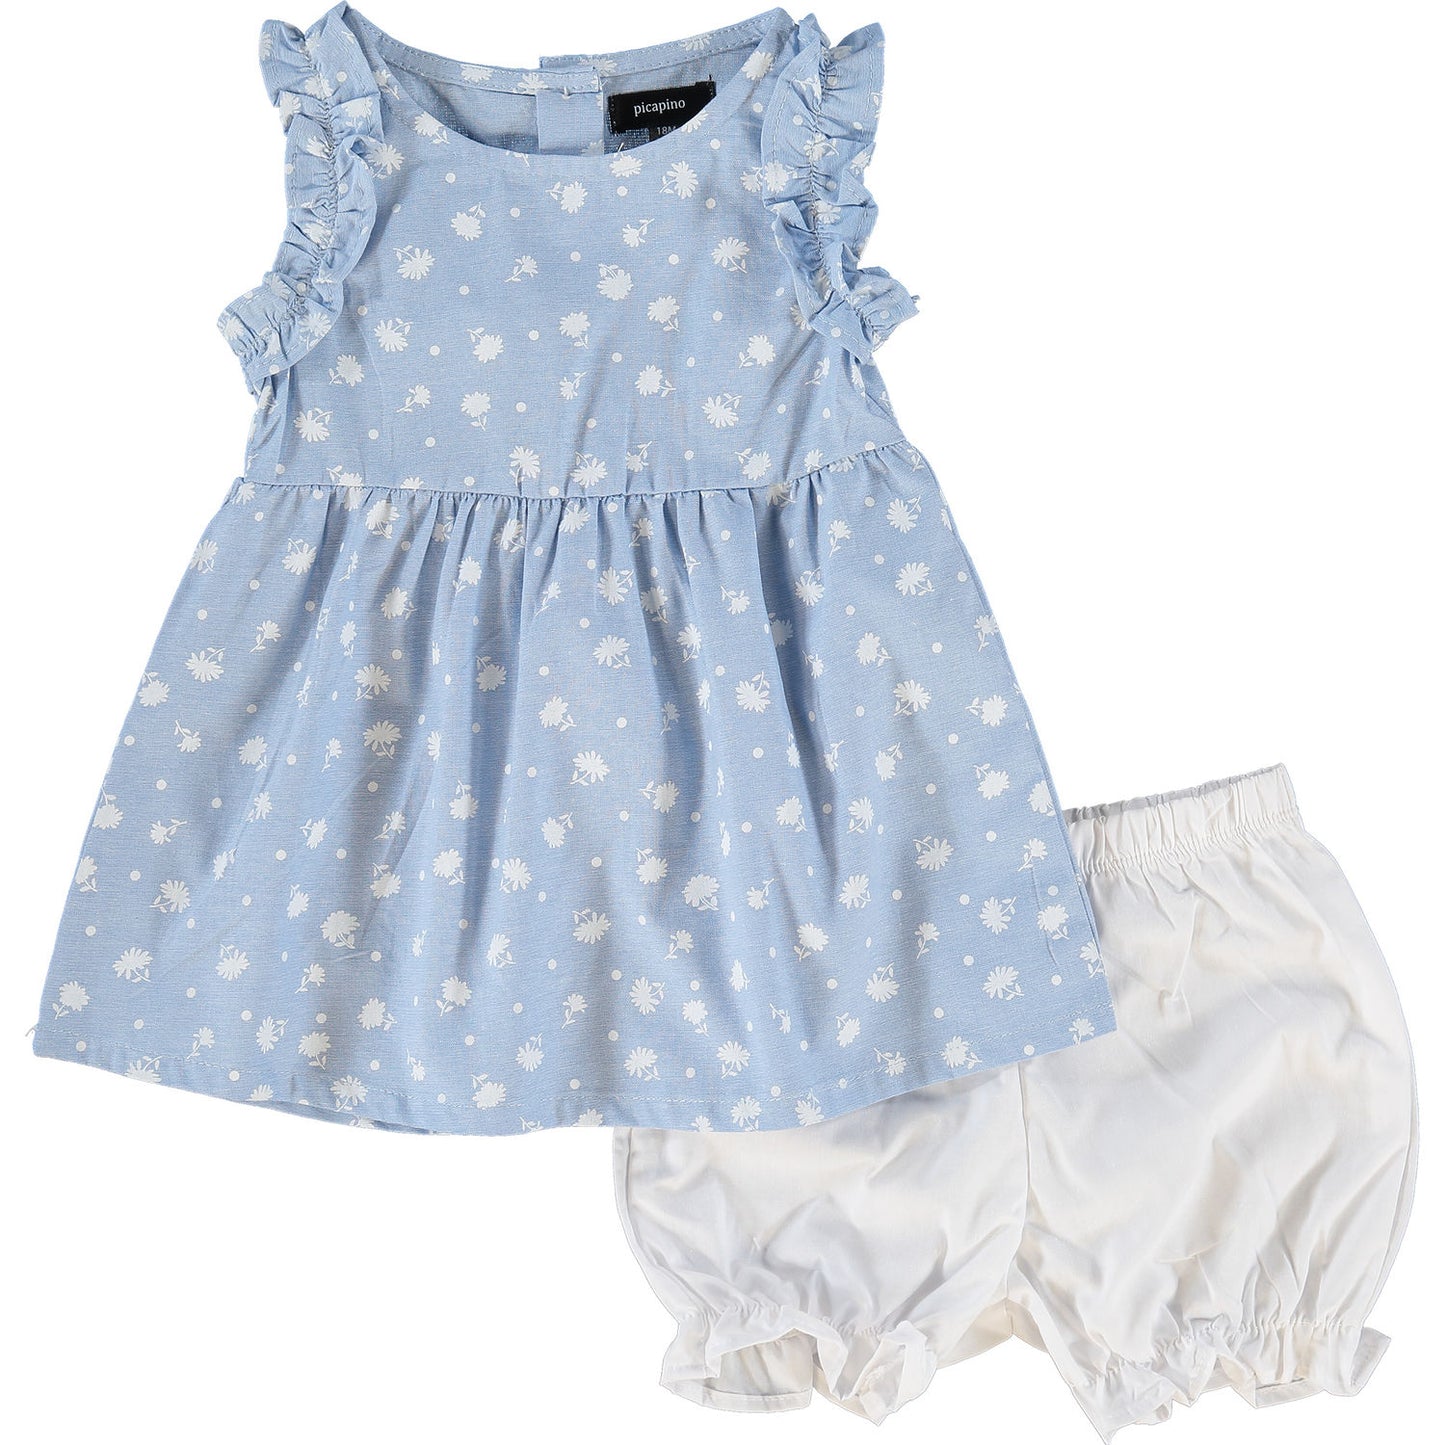 Blue and White Floral Dress and Bloomers